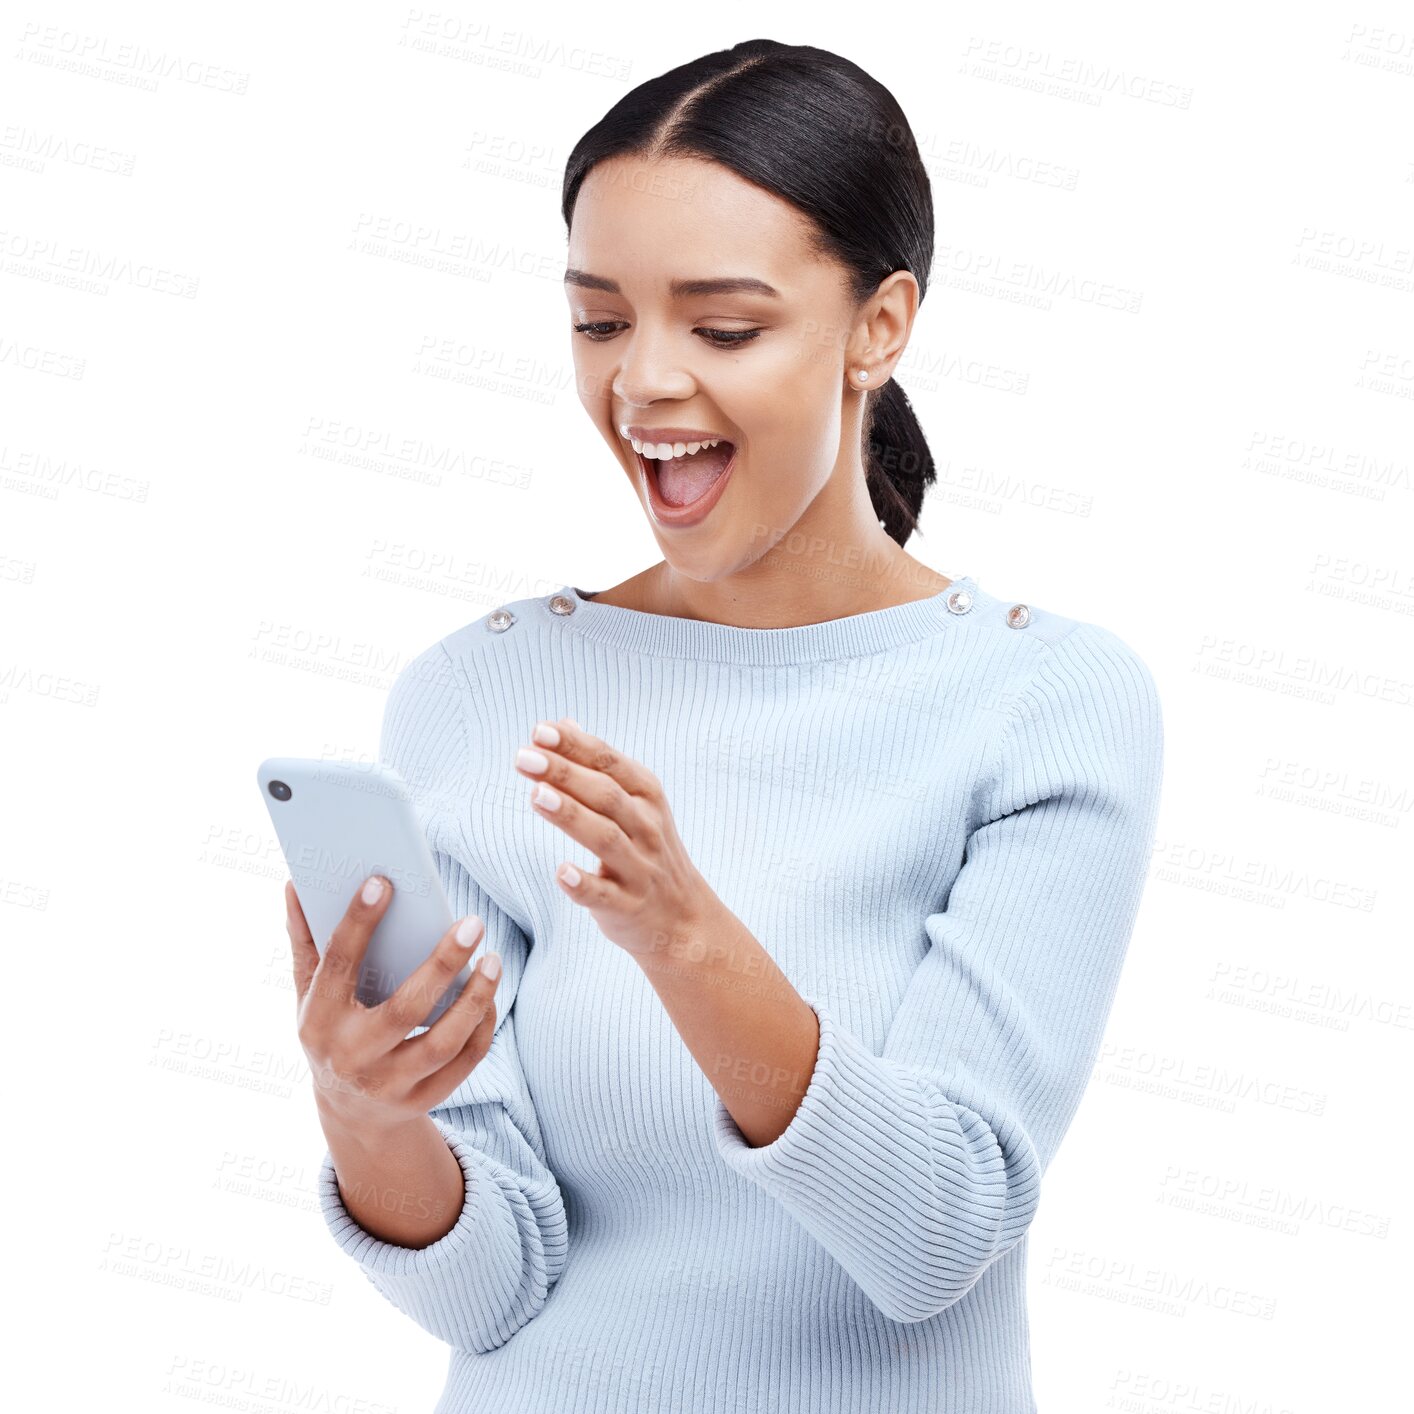 Buy stock photo Smartphone, surprise or woman with news, excited or happy girl isolated on a transparent background. Female person, shocked or model with a cellphone, prize giveaway or png with bonus or feedback